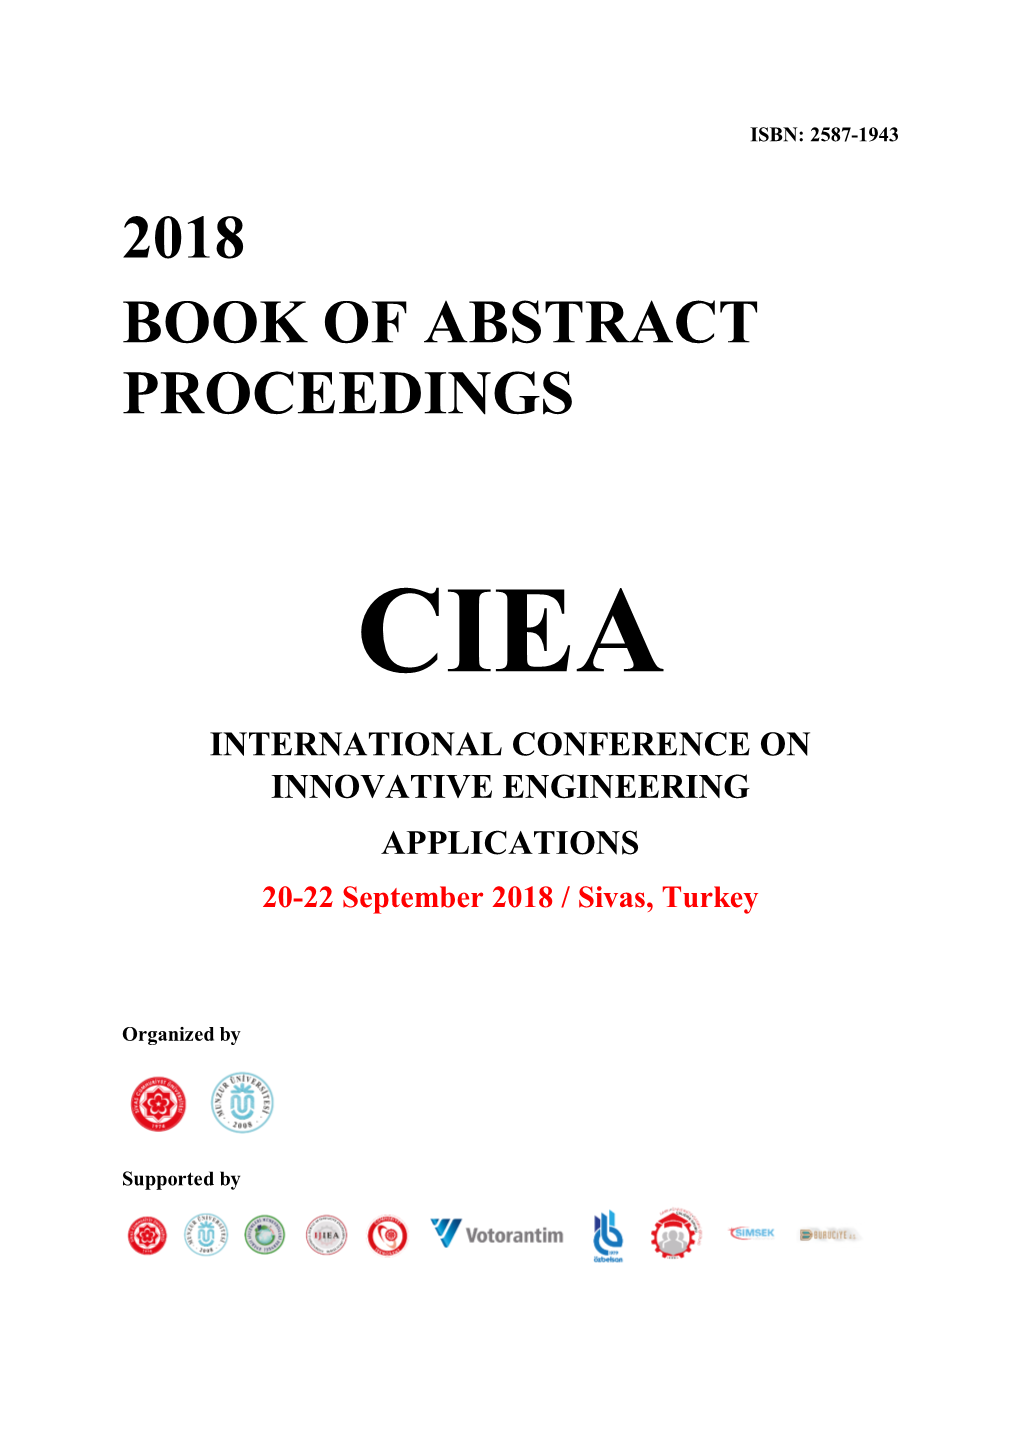 2018 Book of Abstract Proceedings